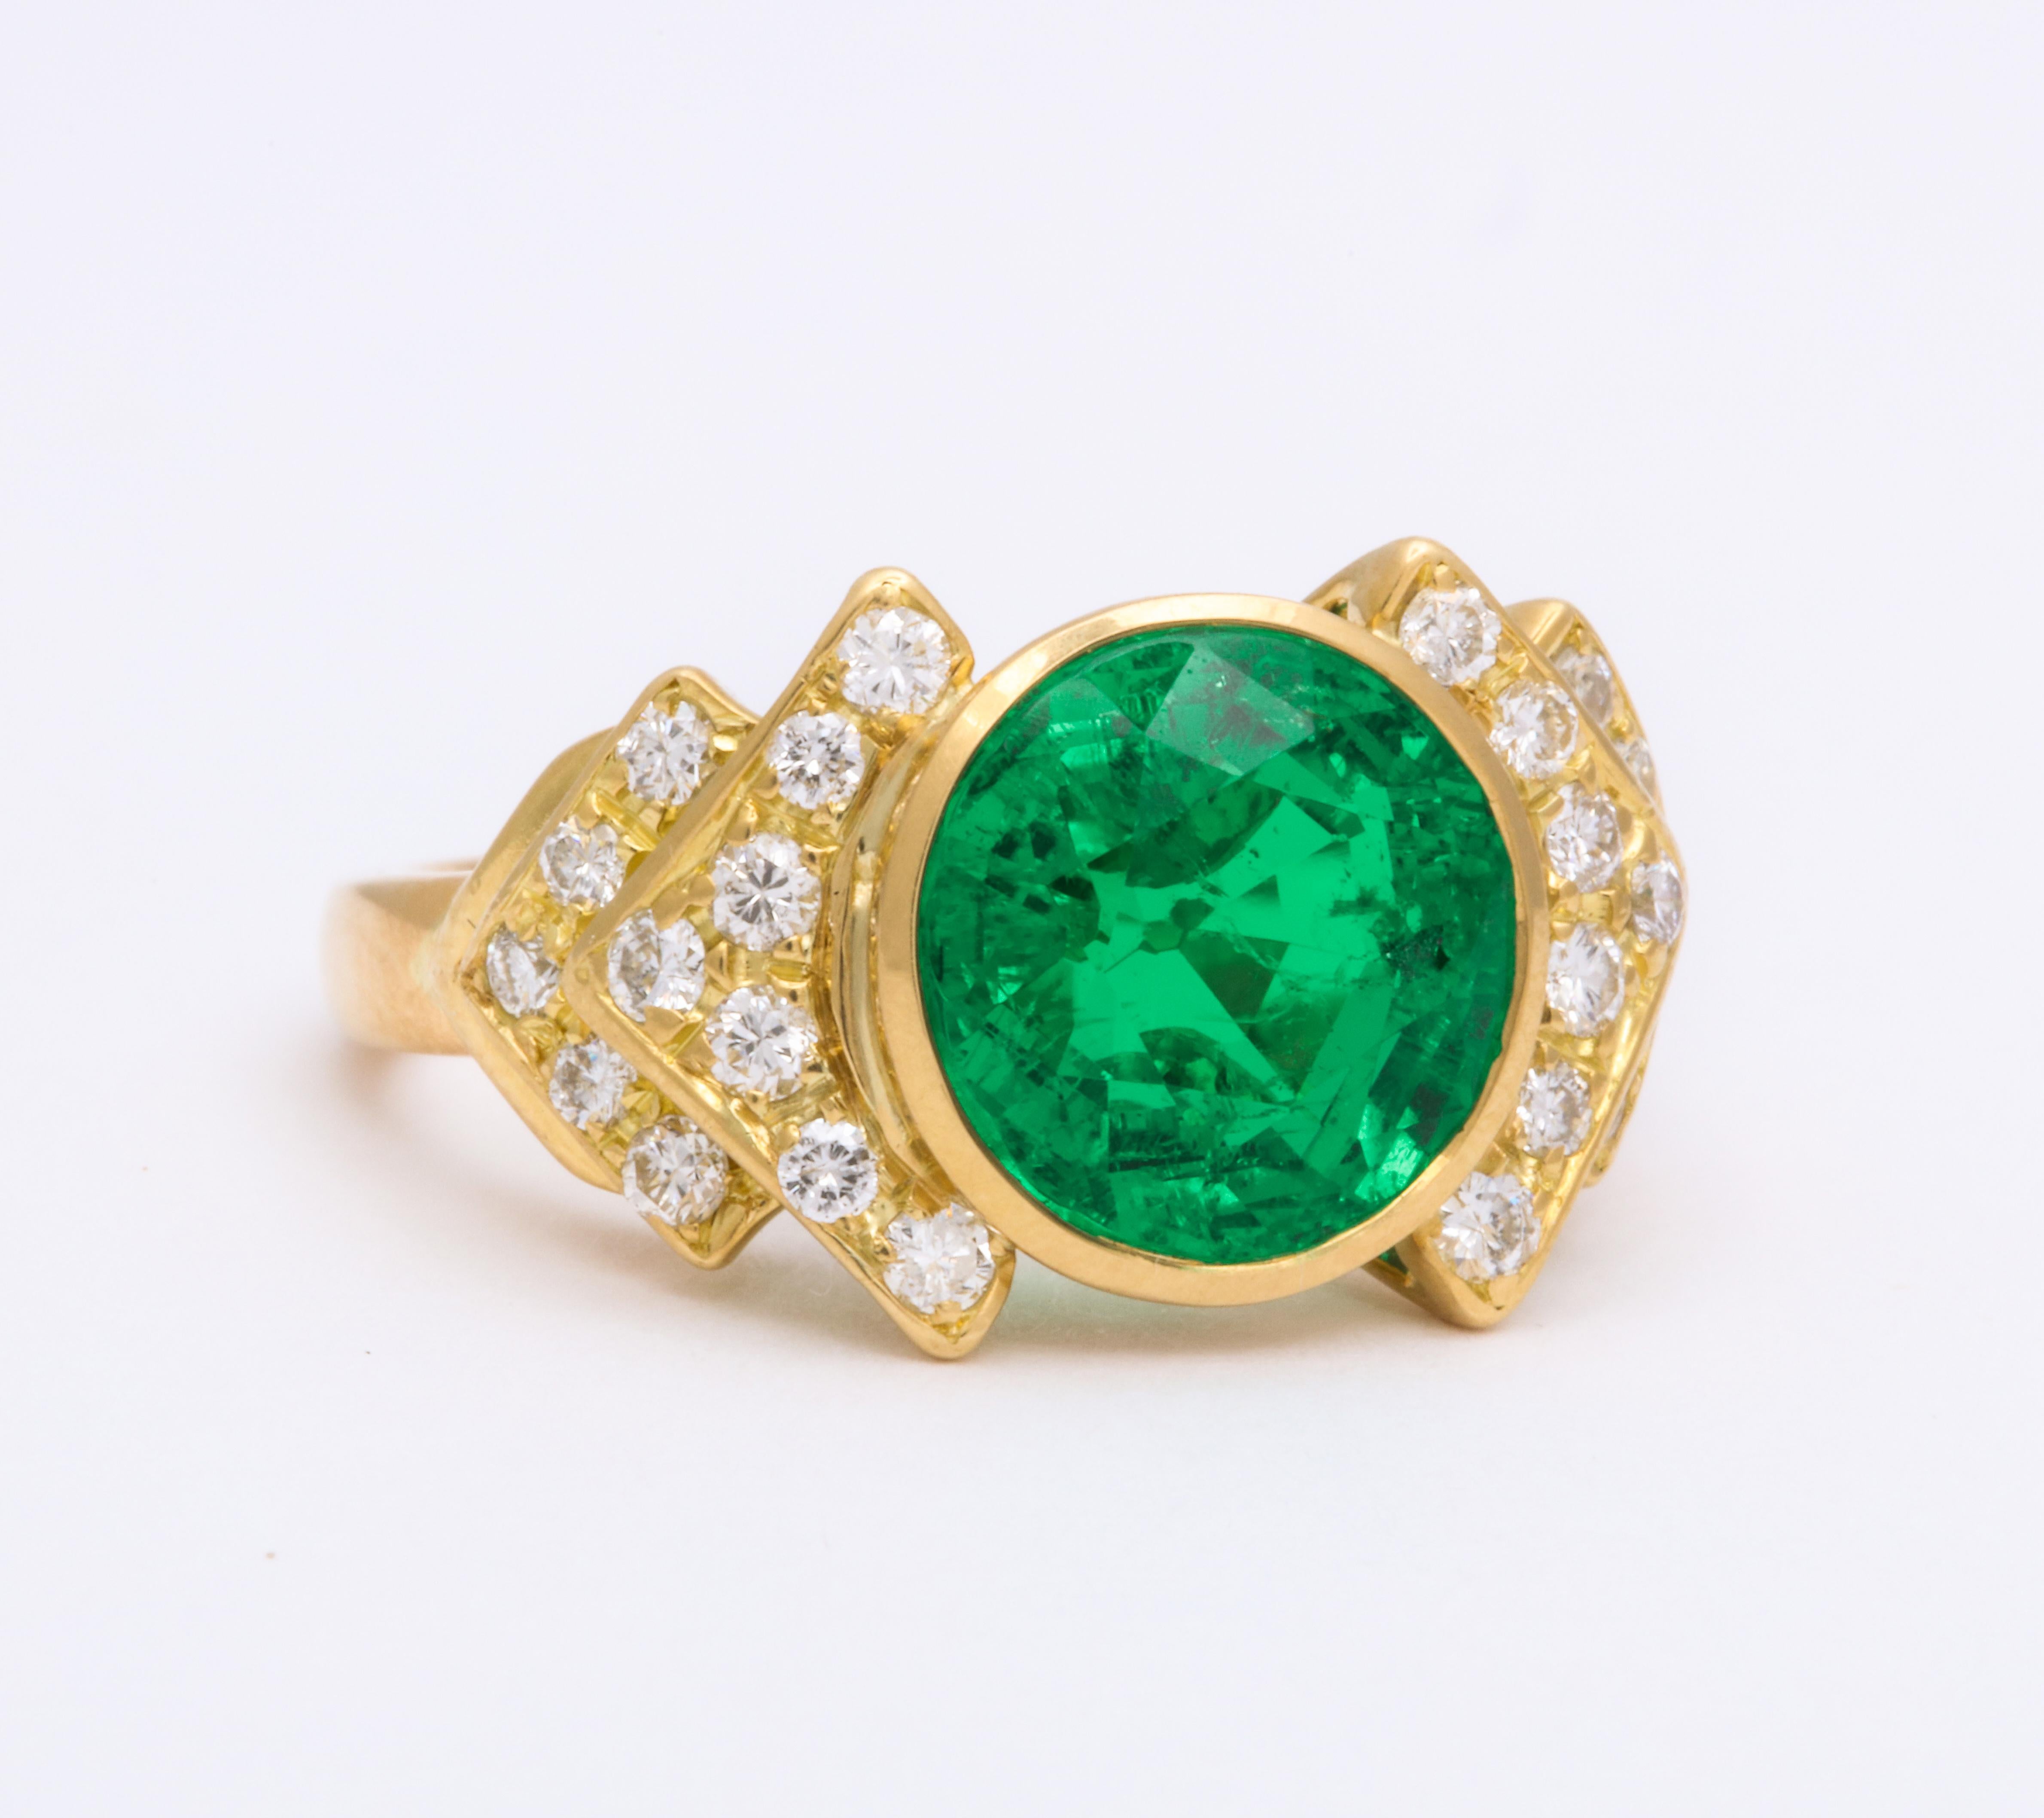 This Bulgari stunner will have your friends talking! An rare find; round faceted Columbian emerald weighing 3.65cts has accompanying AGL gem report stating said emerald is from Colombia, and has only minor indications of oil enhancement. This green